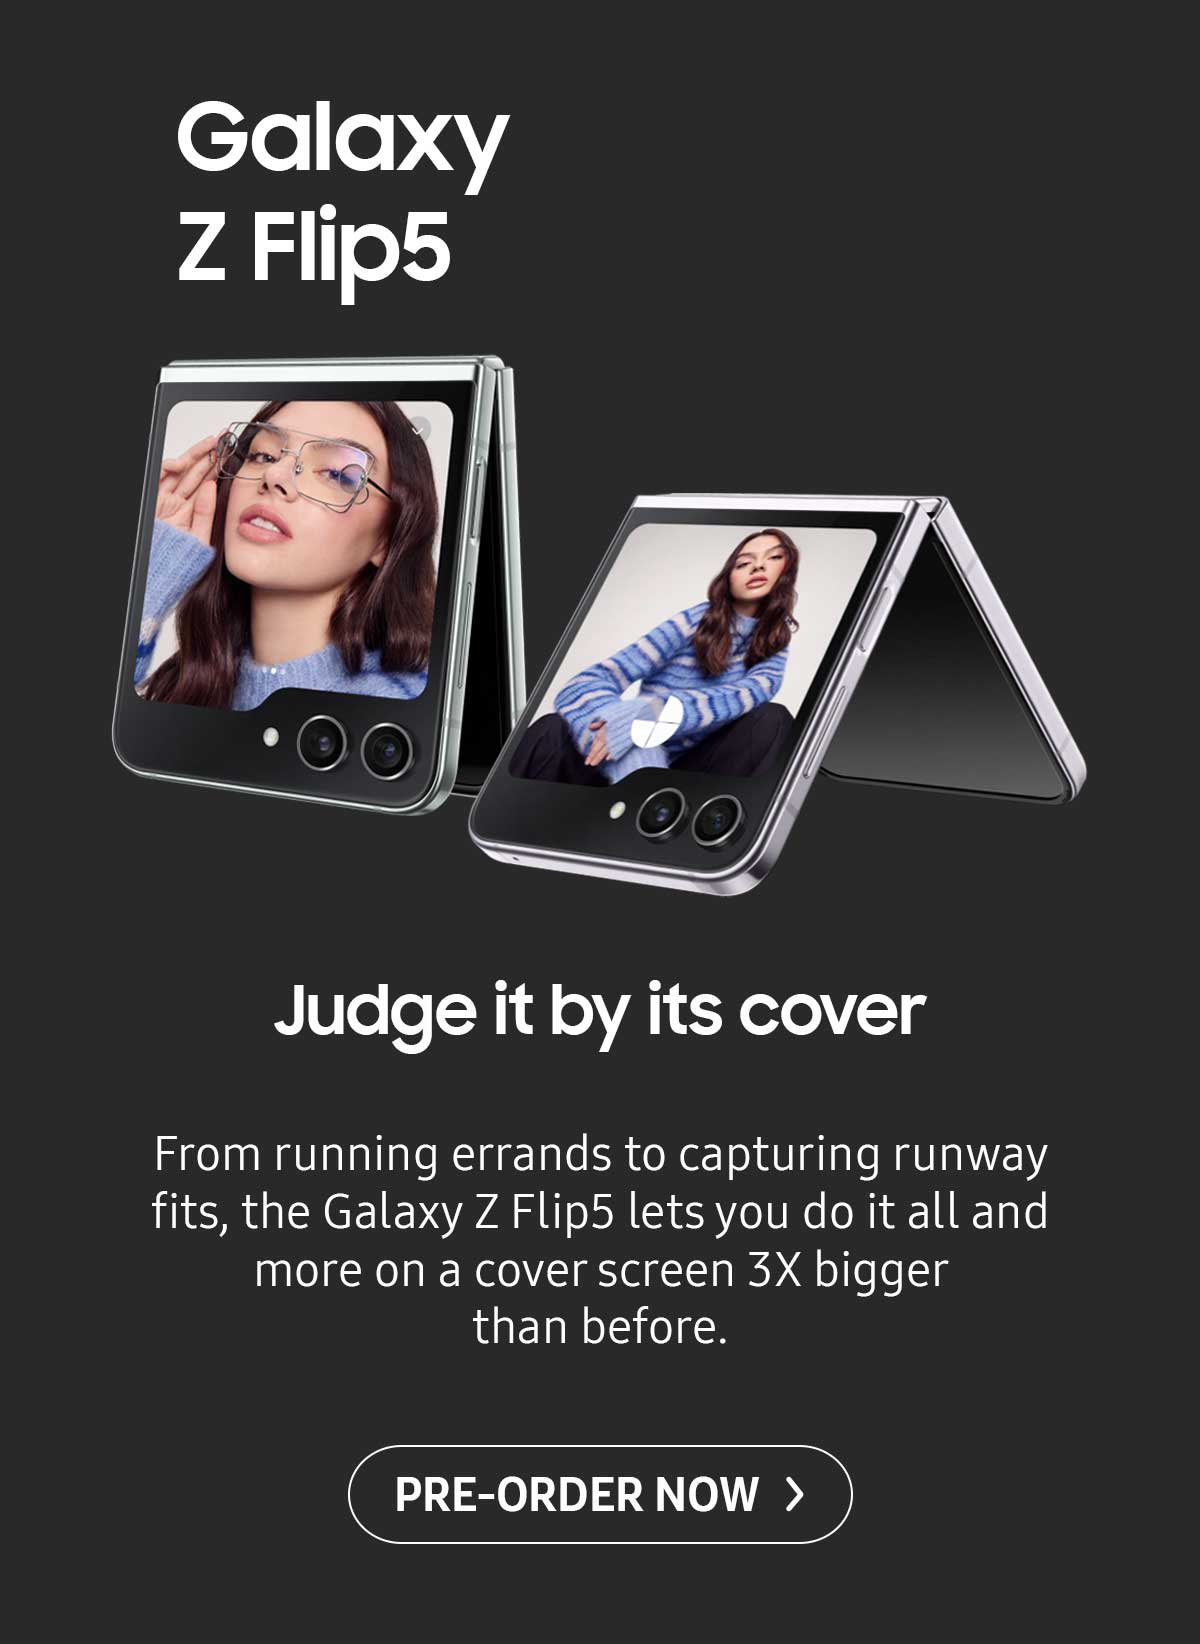 Galaxy Z Flip5. Judge it by its cover. From running errands to capturing runway fits, the Galaxy Z Flip5 lets you do it all and more on a cover screen 3X bigger than before. Pre-order now!